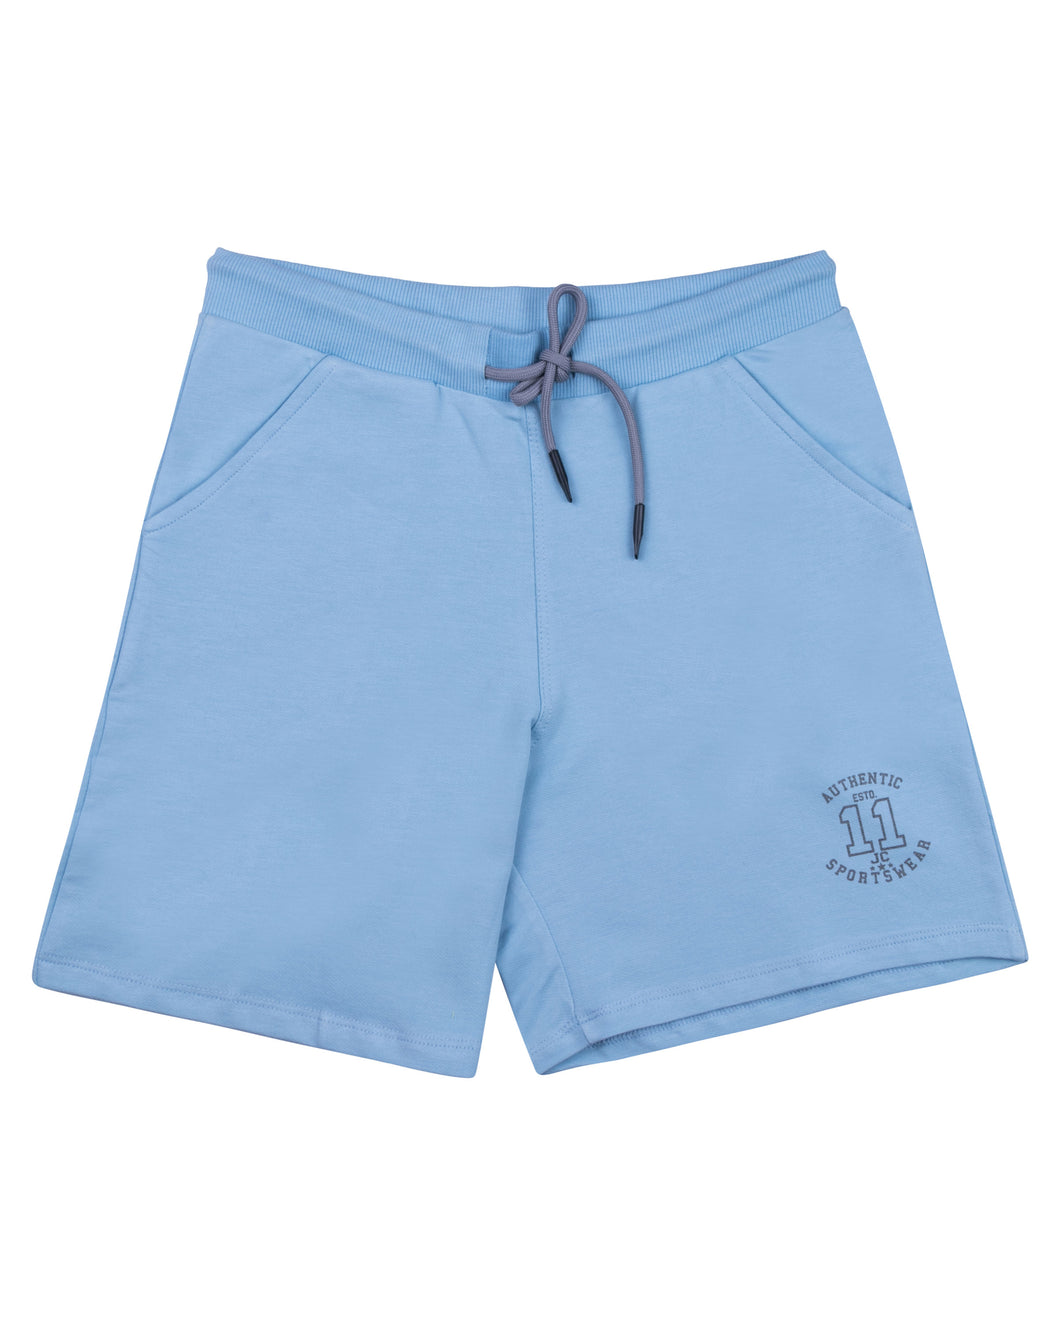 Girls Solid Light Blue Casual Shorts